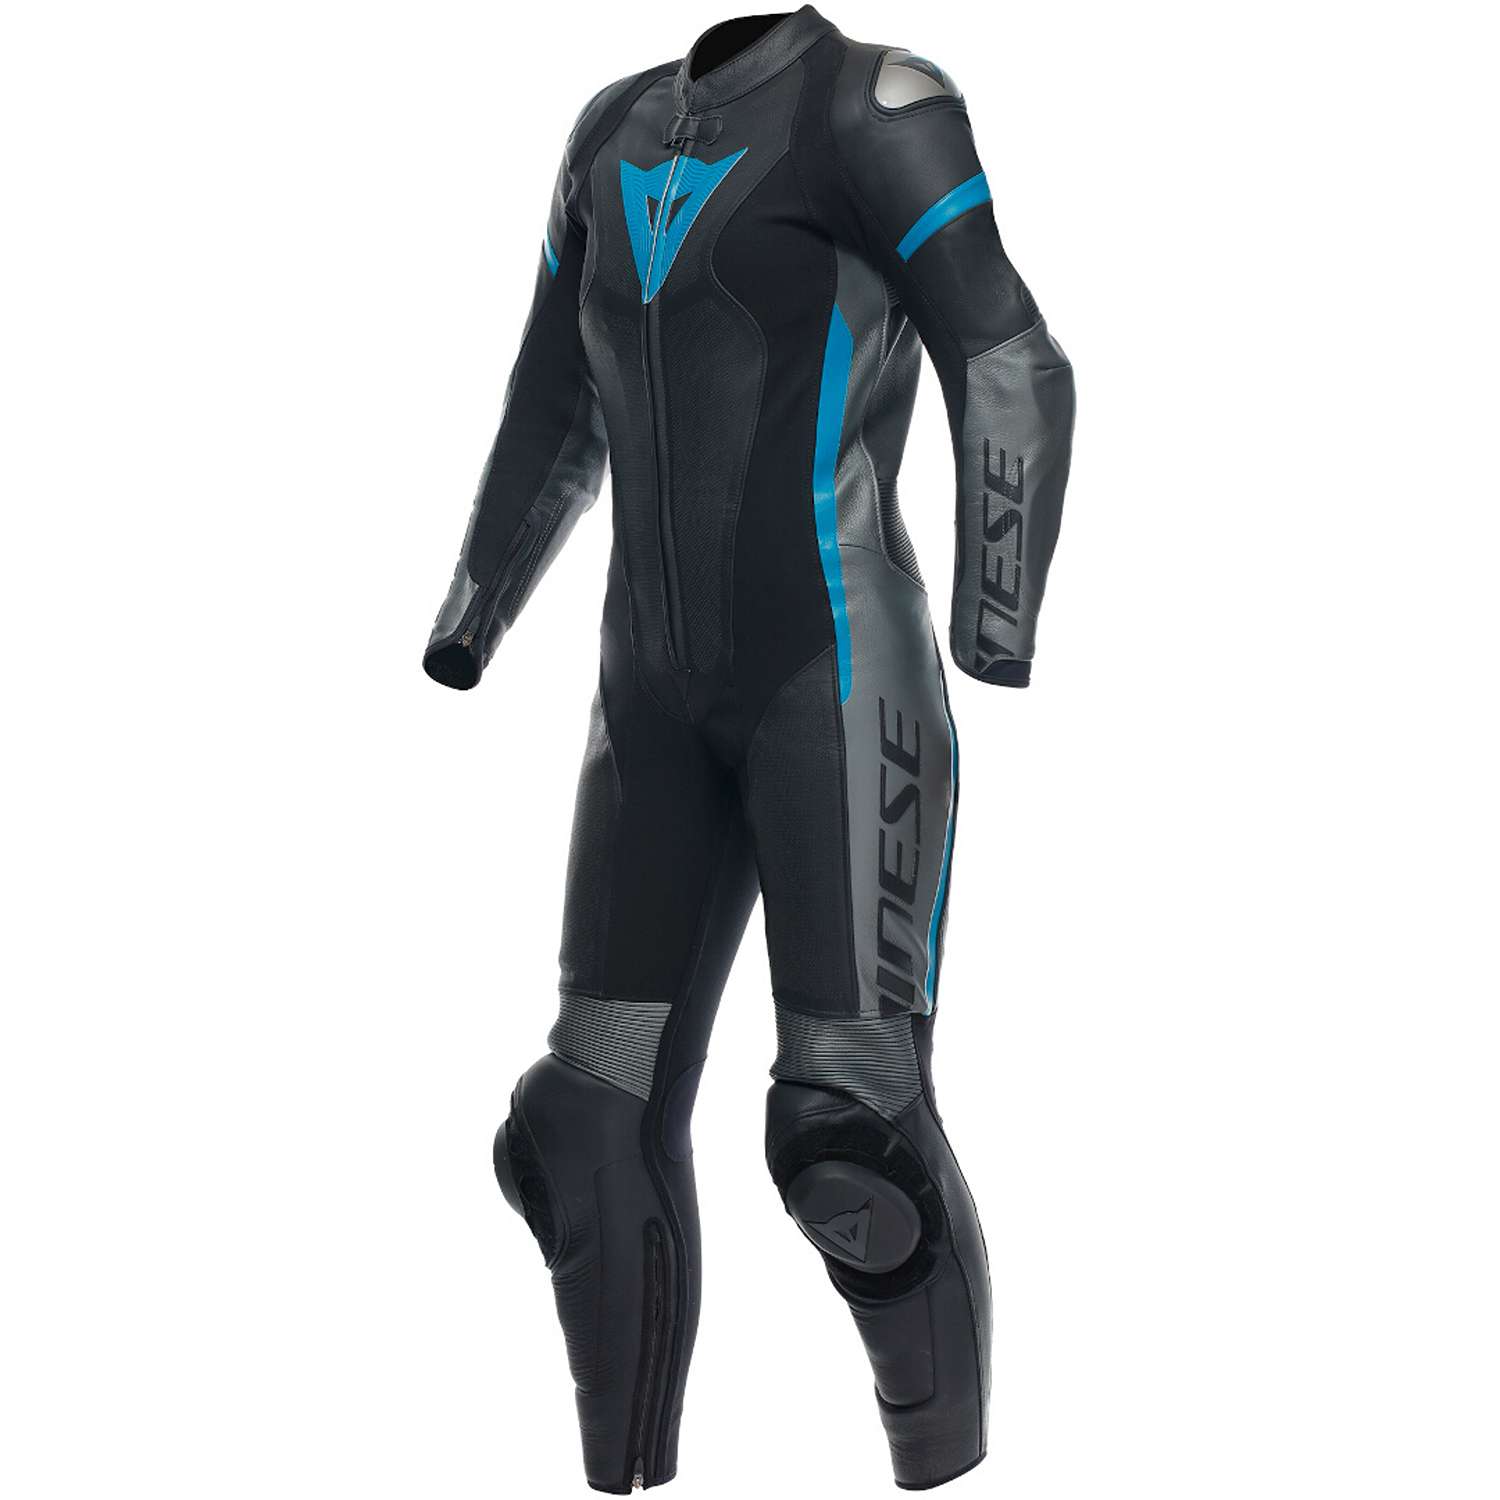 Image of Dainese Grobnik Lady Leather 1Pc Suit Perf Black Anthracite Teal Size 38 ID 8051019498137